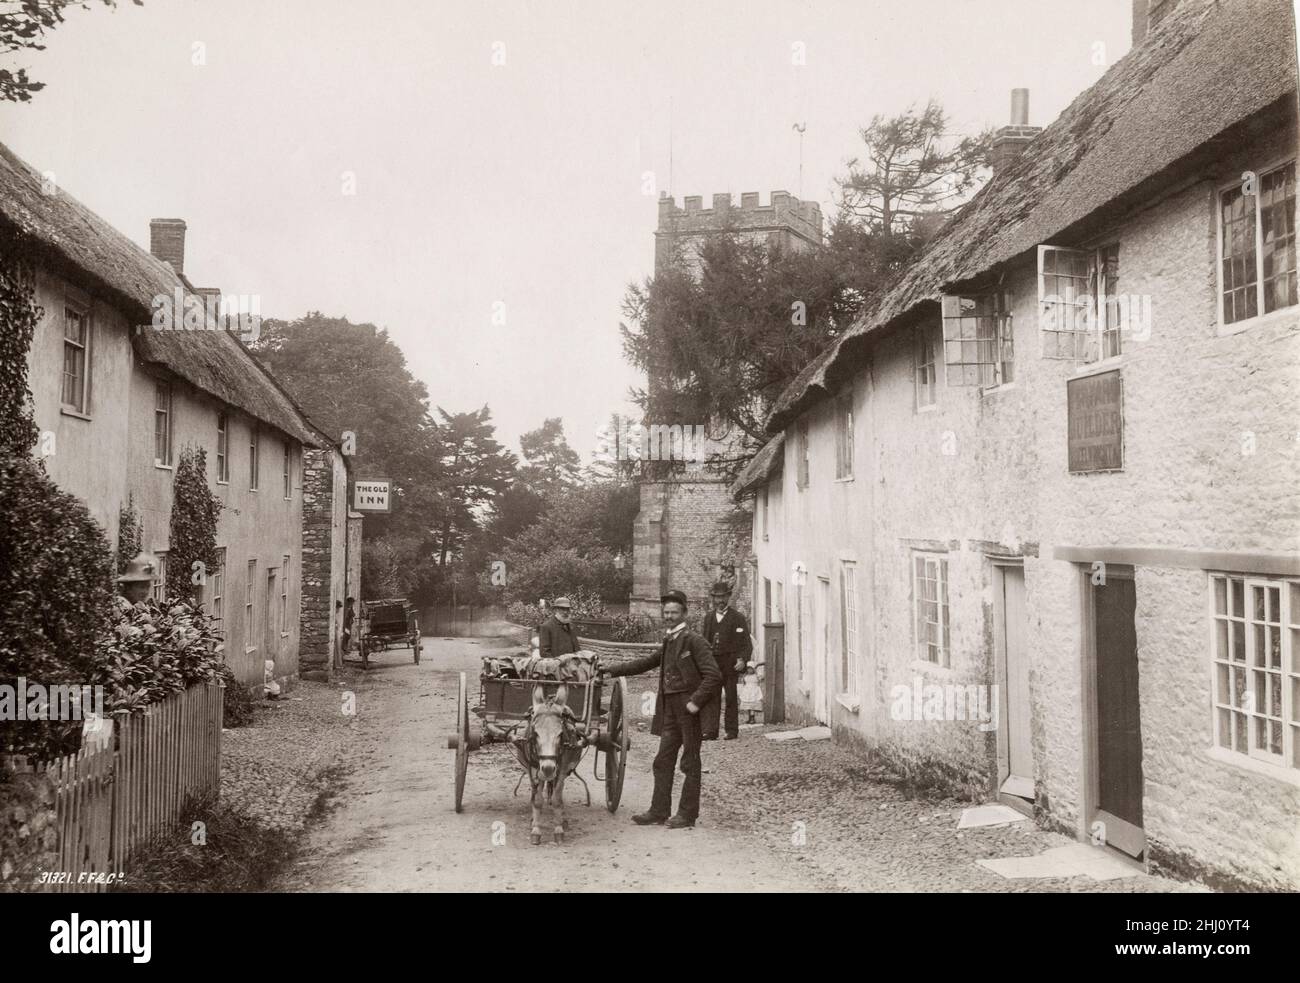 Vintage photograph, late 19th, early 20th century, view of 1892 - Man with donkey and cart, Hawkchurch, Devon Stock Photo